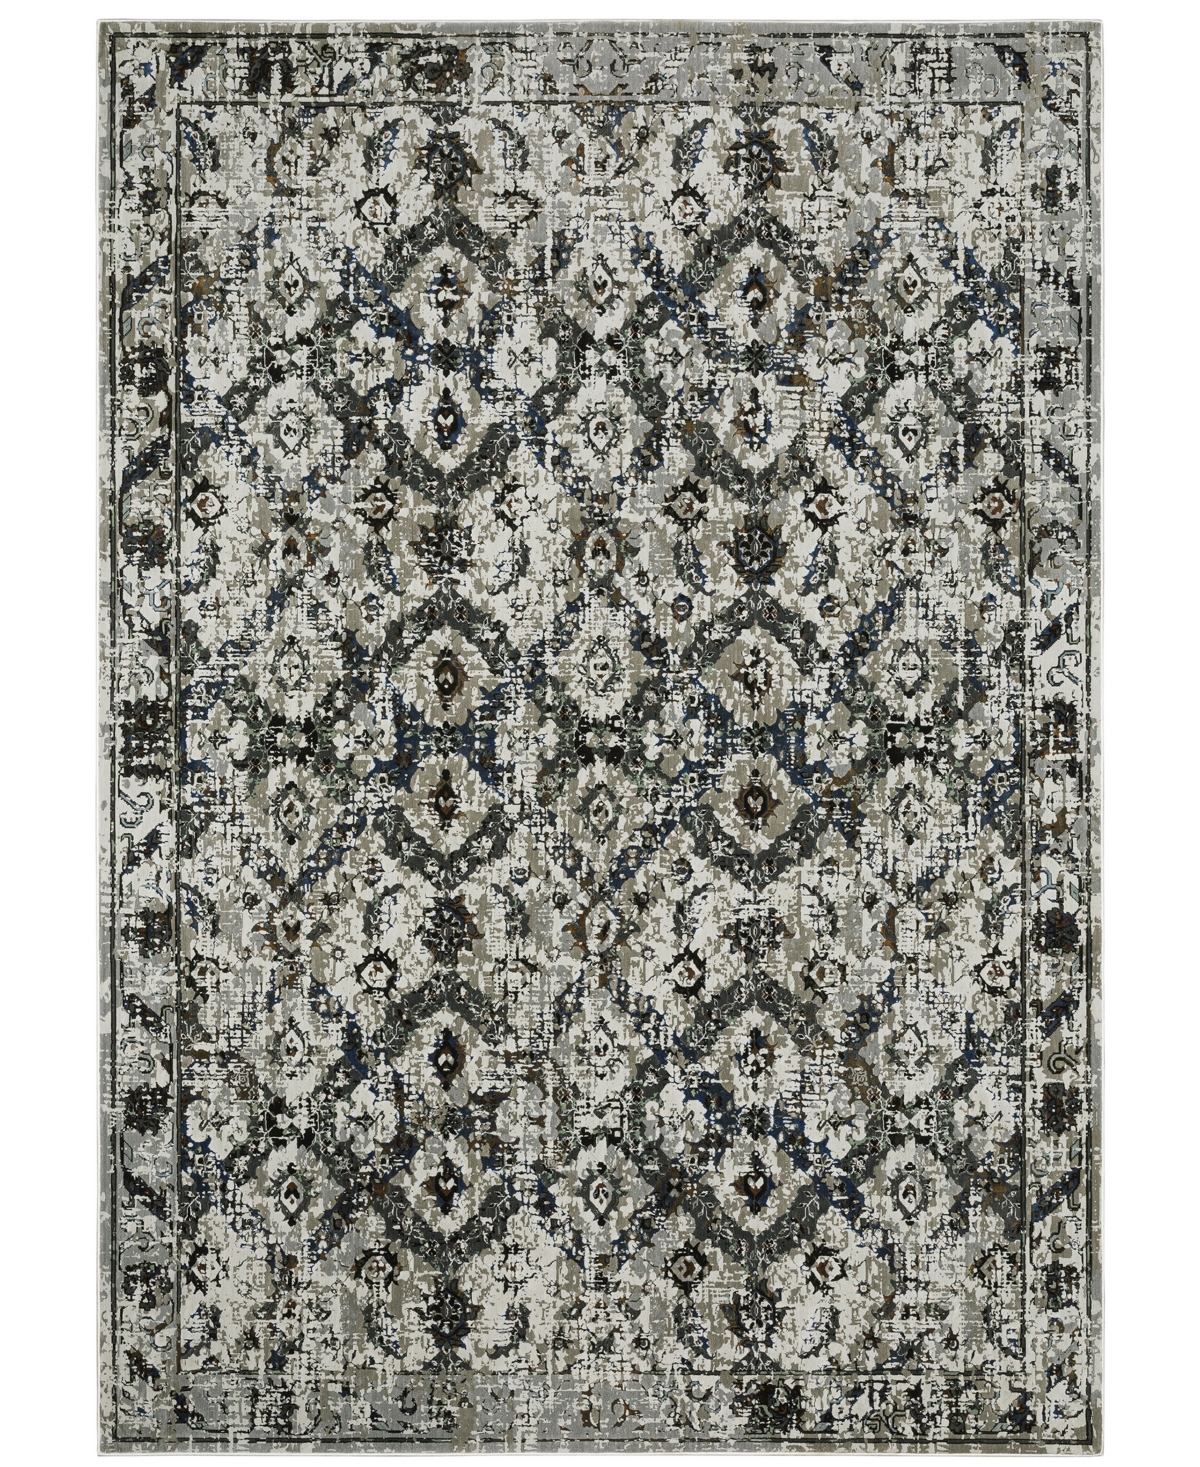 Km Home Astral 1003ASL 6'7in x 9'6in Area Rug - Charcoal